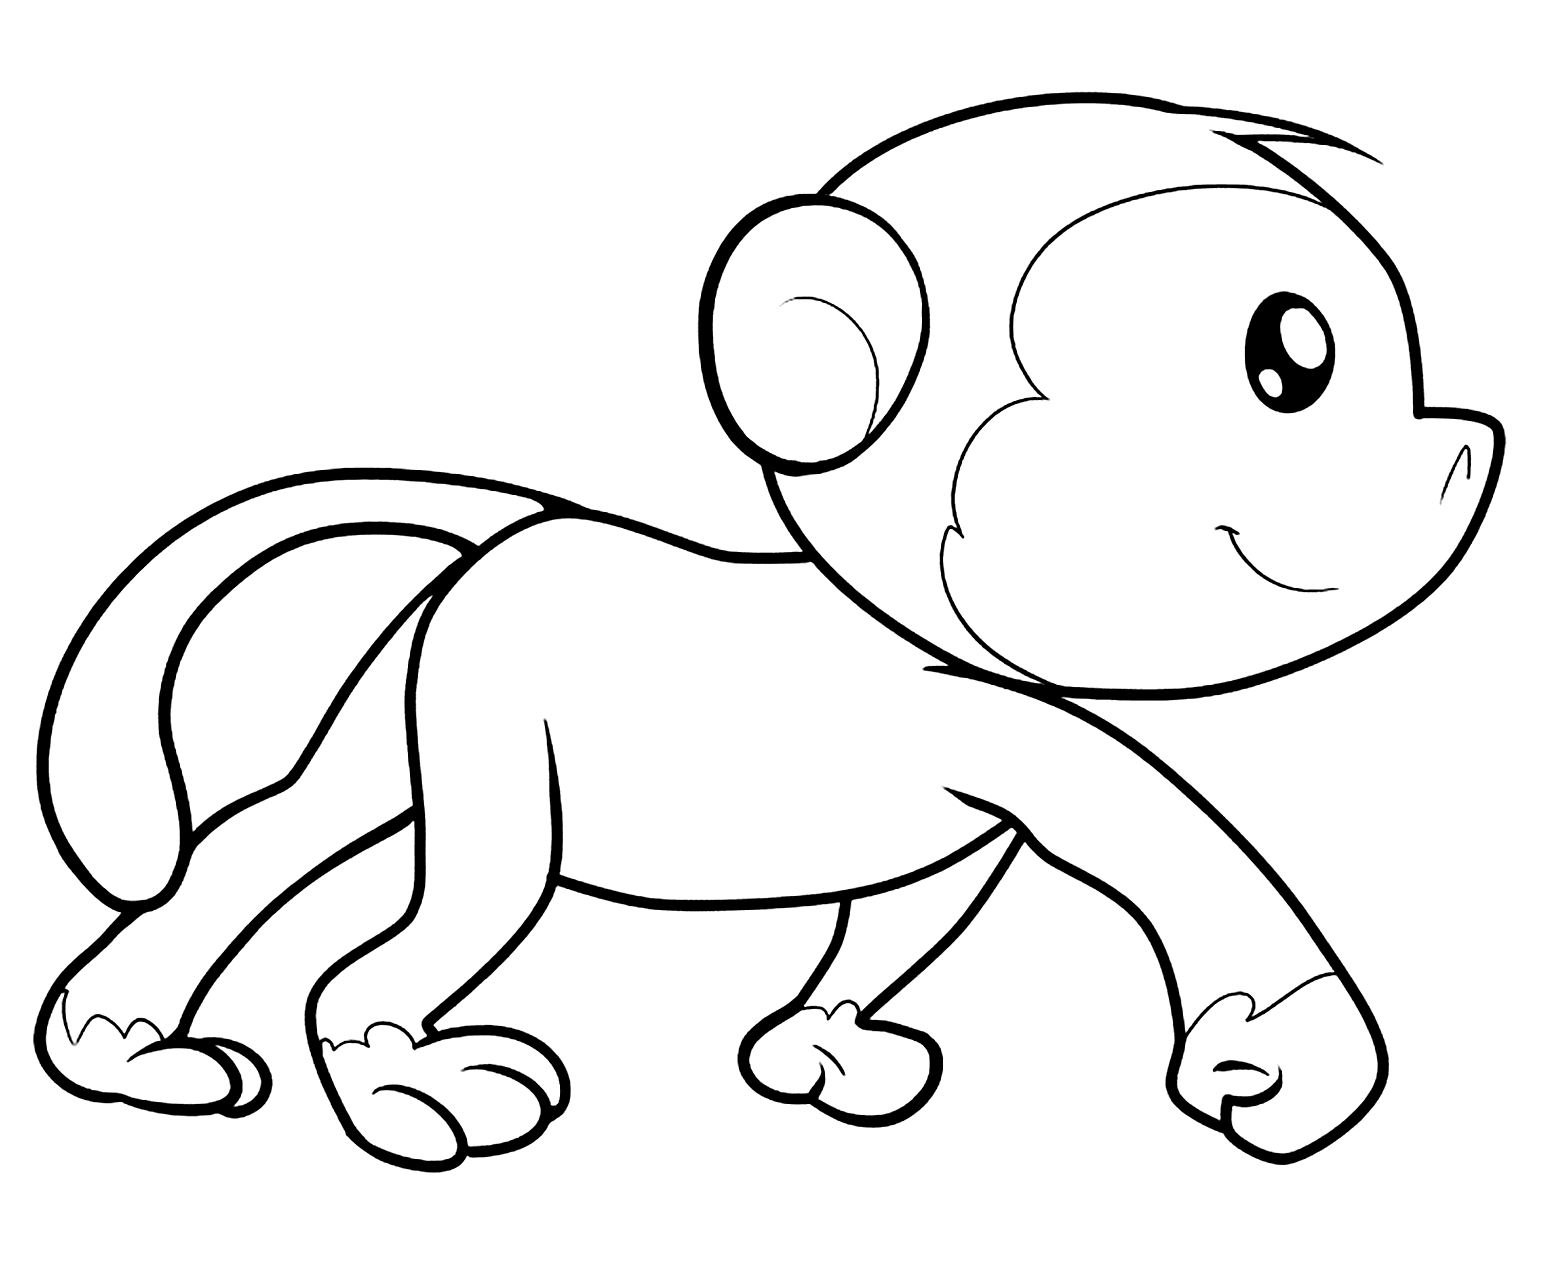 Printable Monkey Coloring Pages For Kids